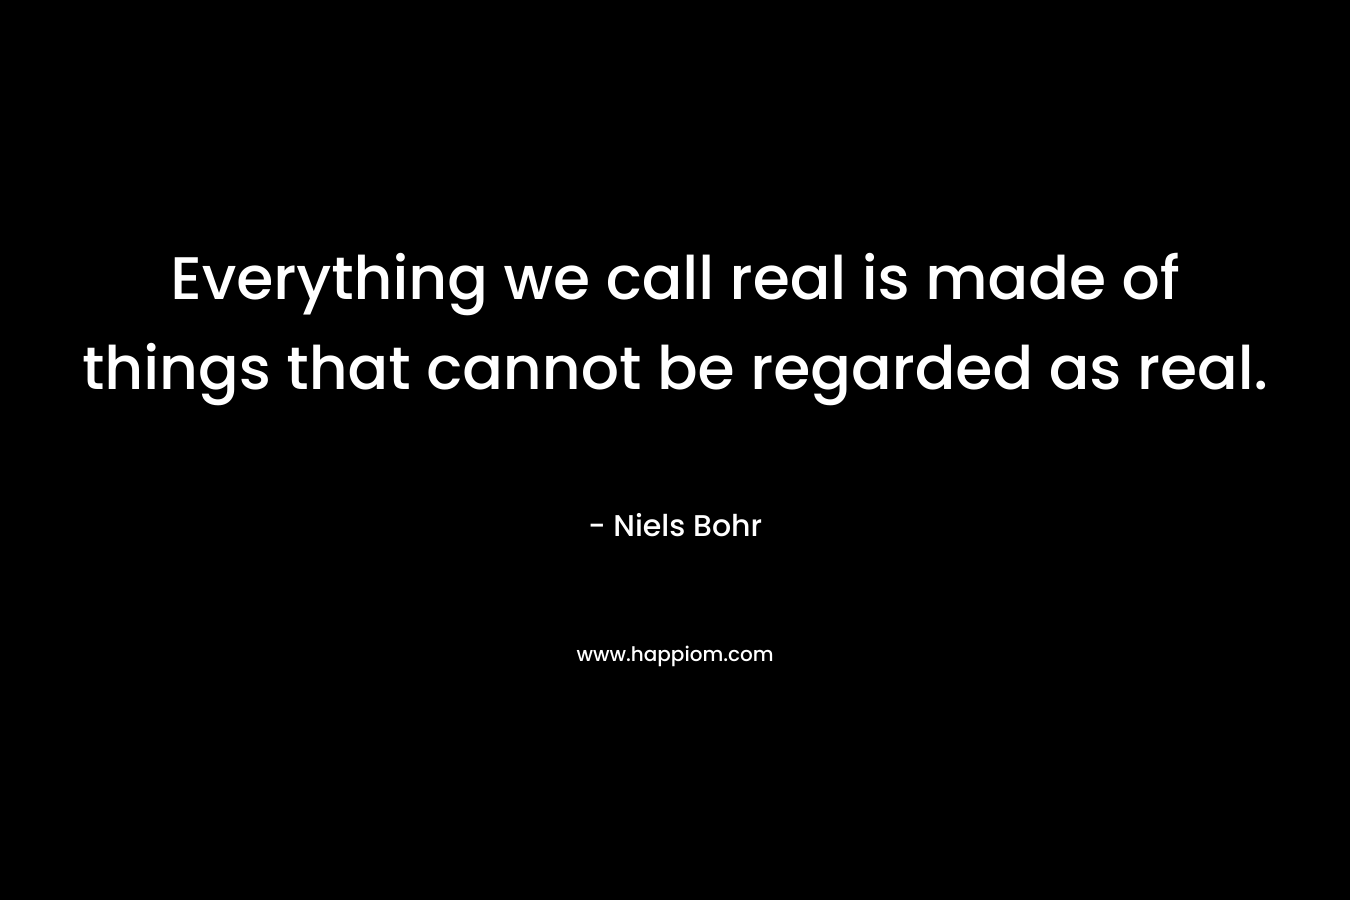 Everything we call real is made of things that cannot be regarded as real.